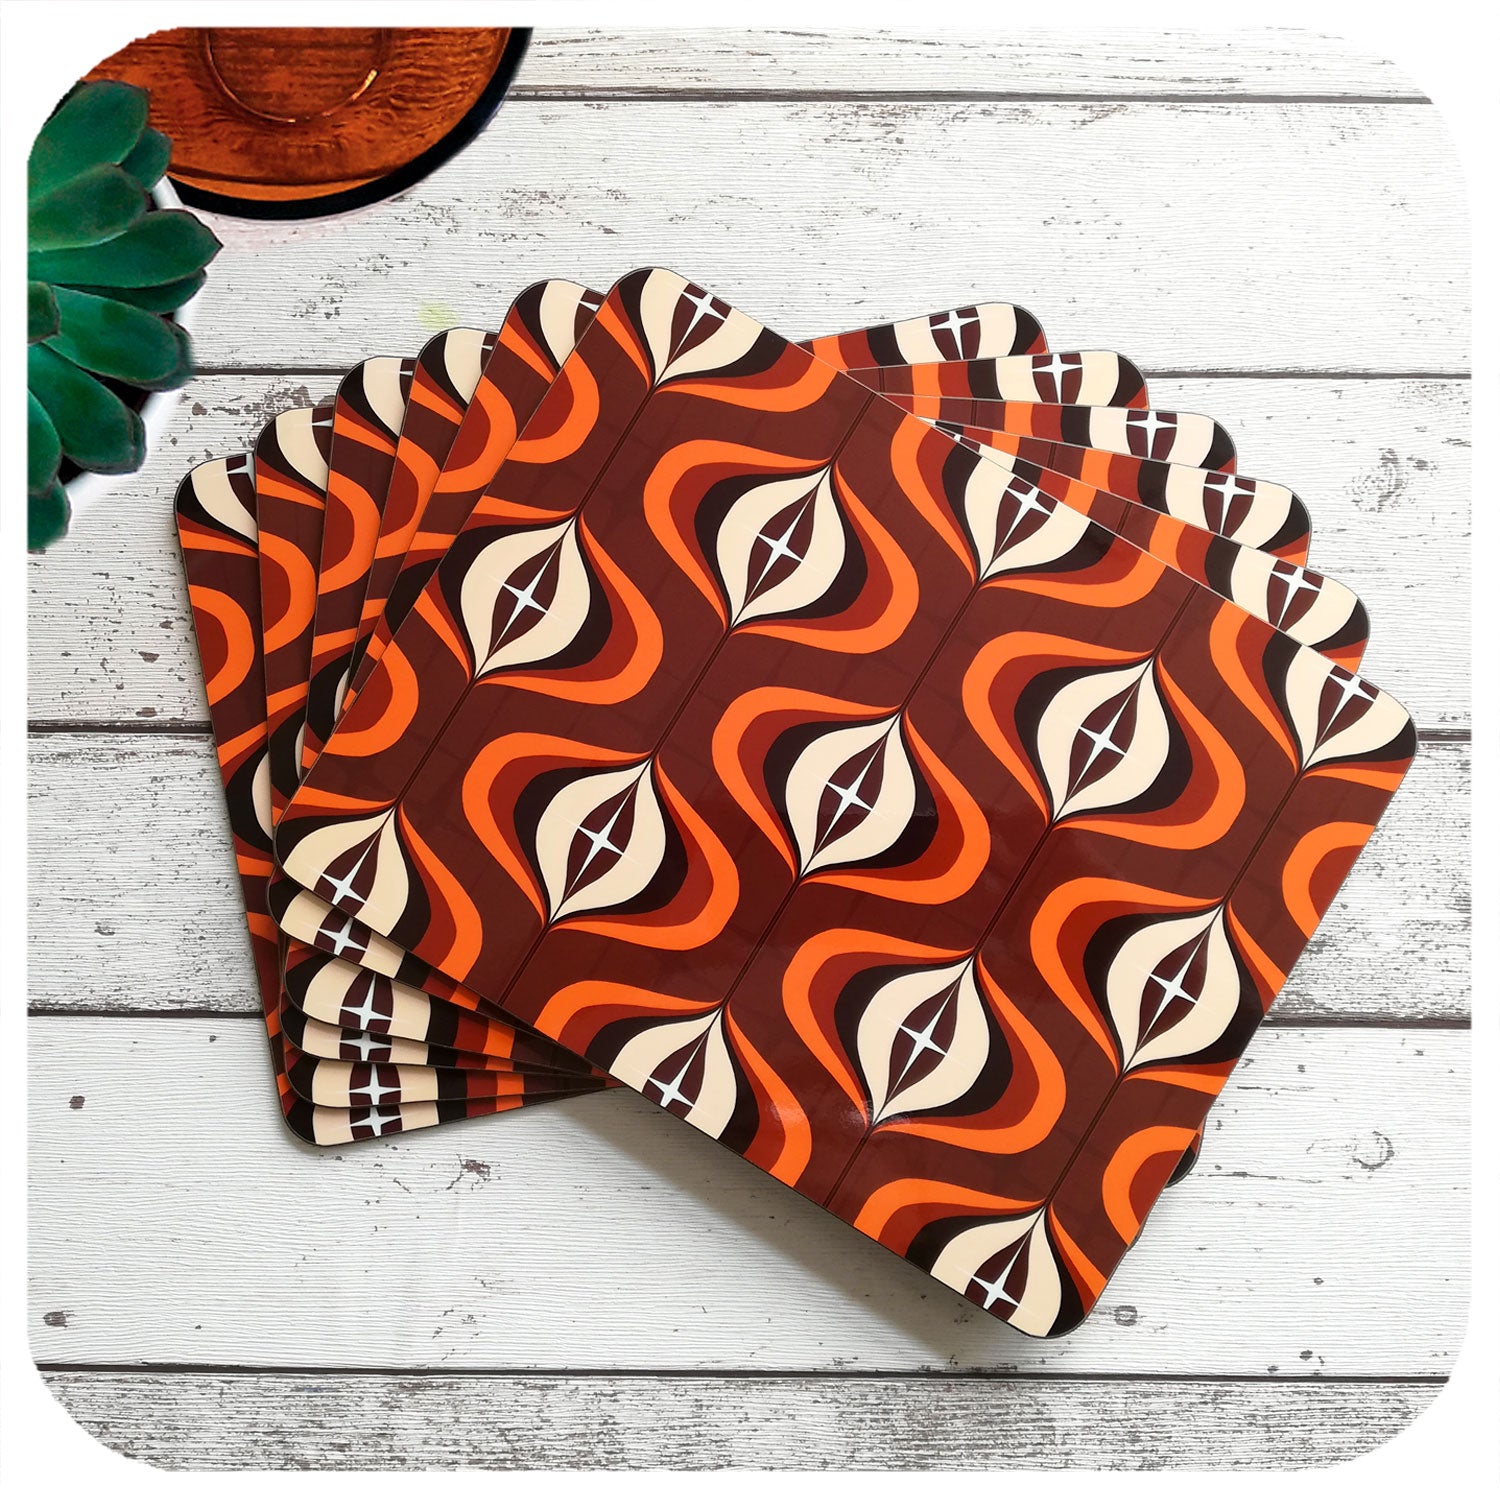 1970s Op Art Placemats in Brown and Orange, set of 6 laid out in a fan | The Inkabilly Emporium